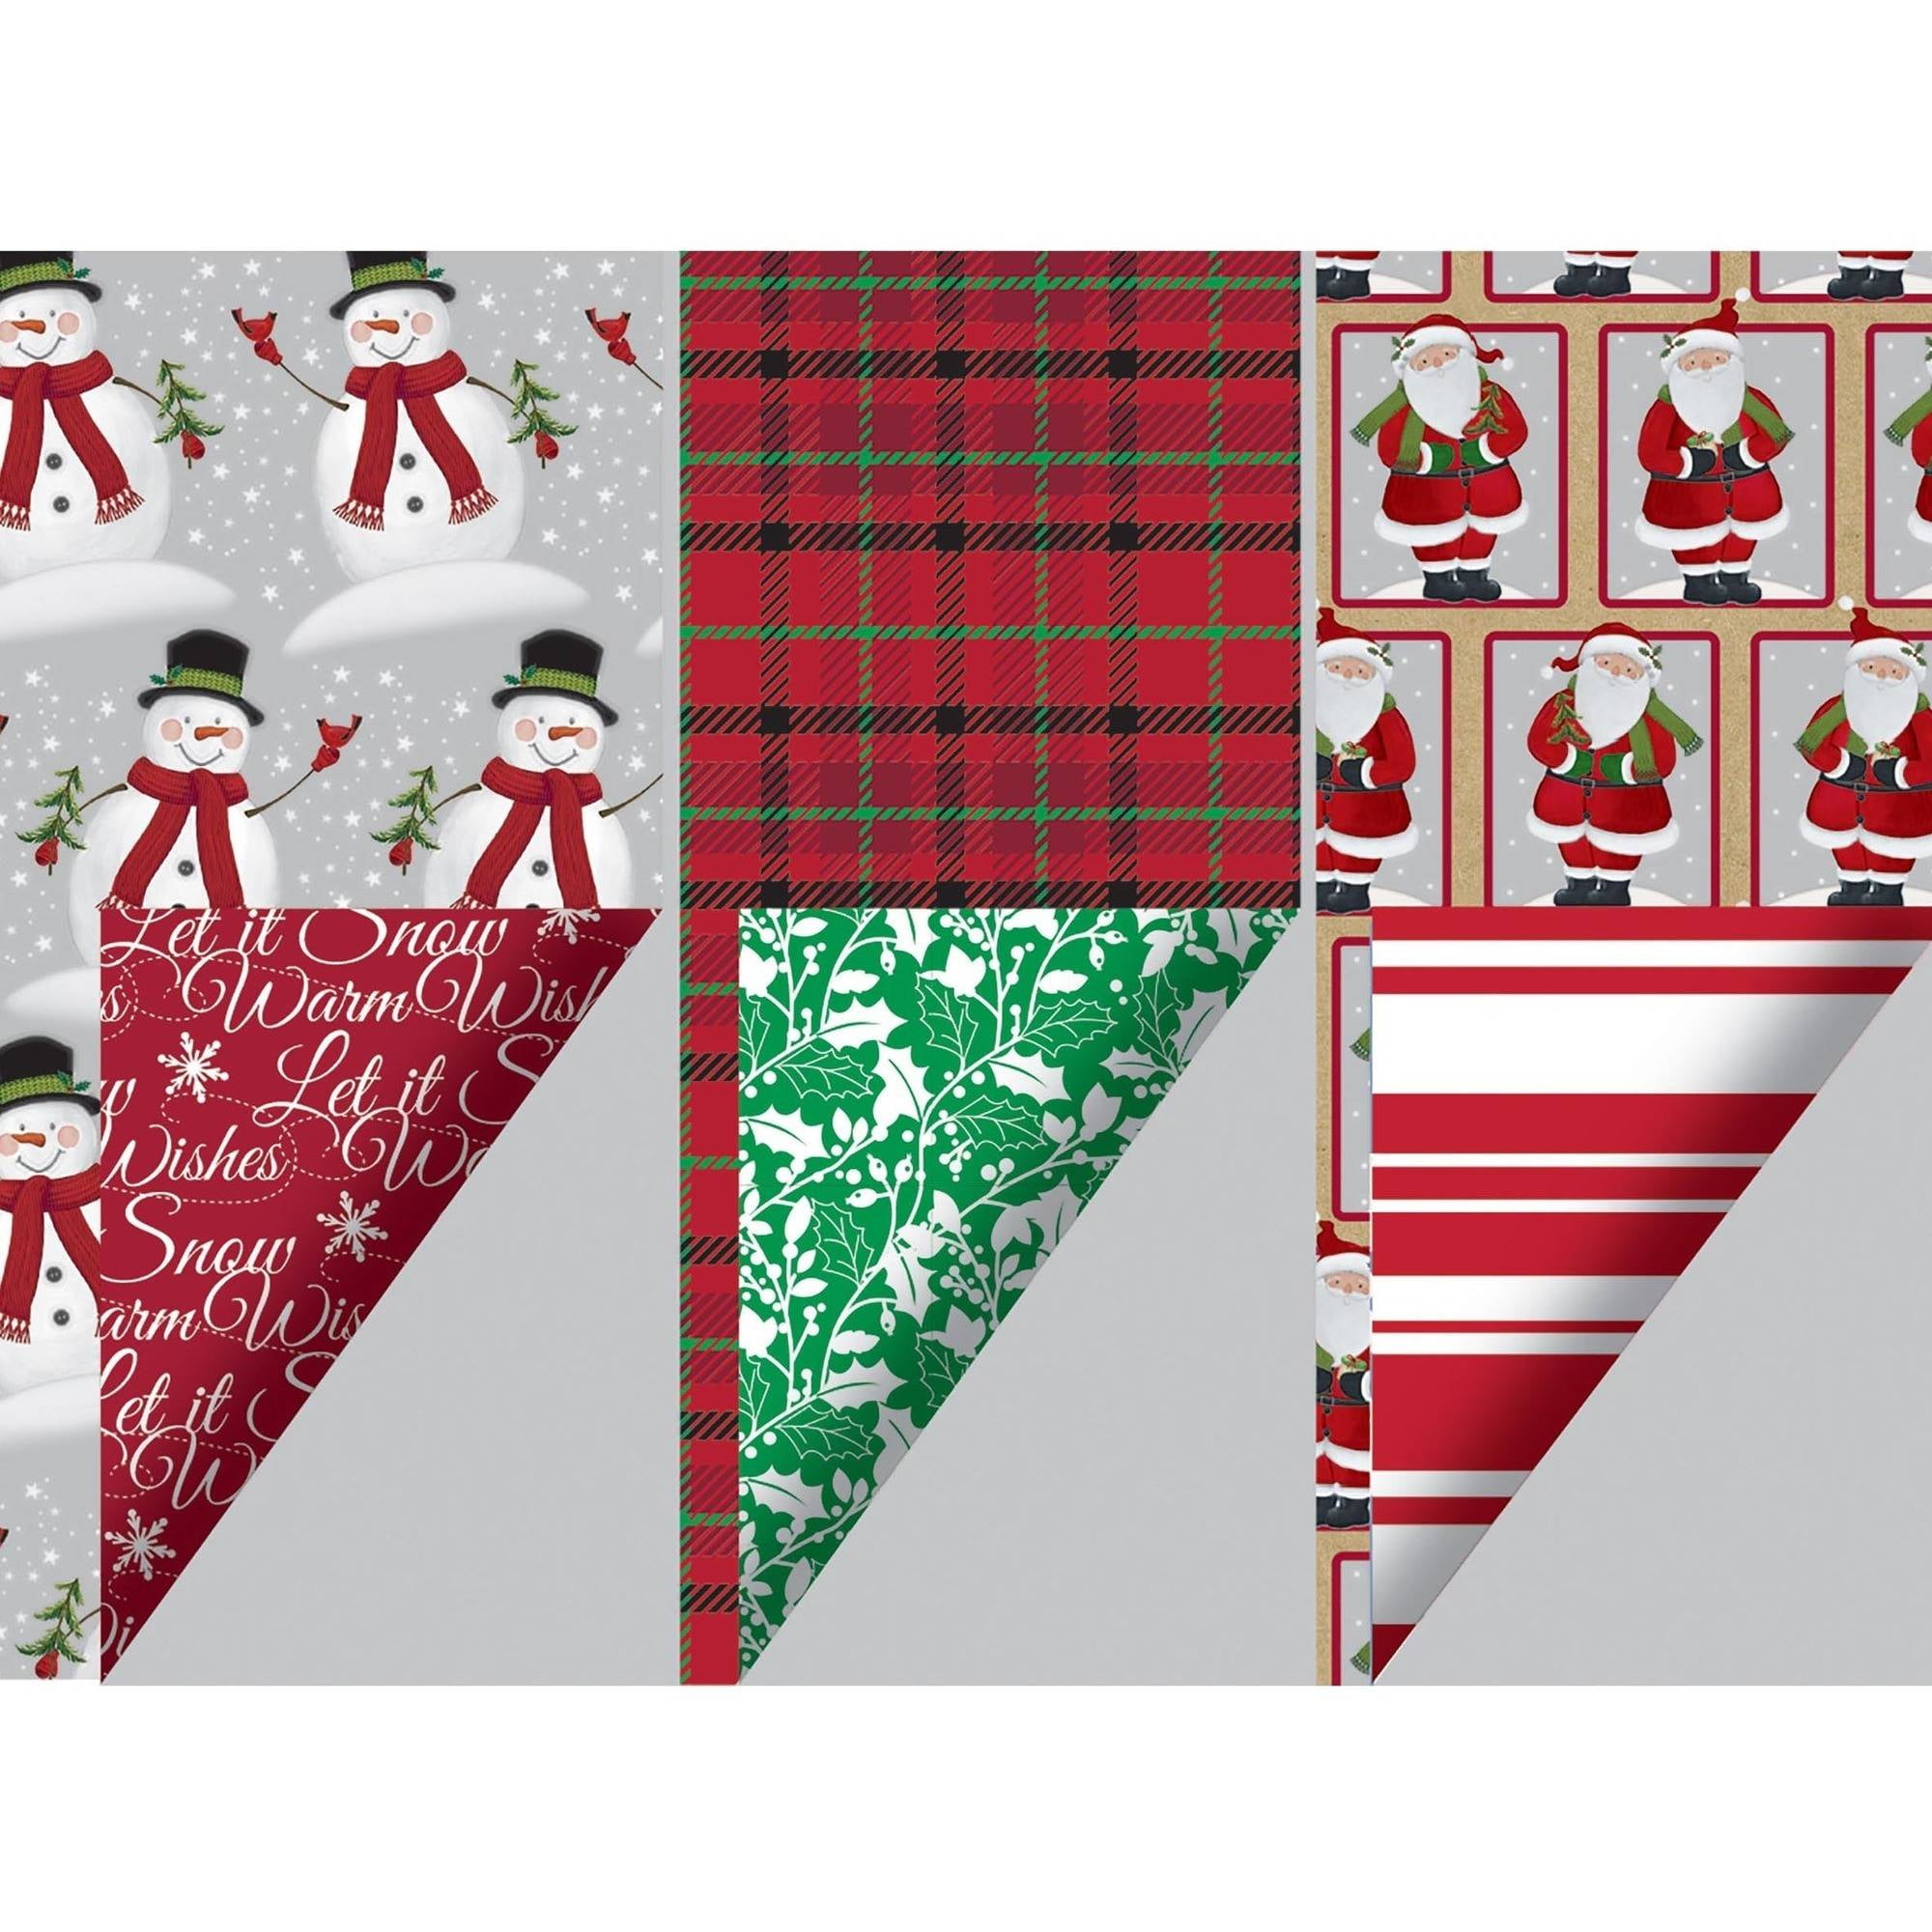 Hallmark Star Wars Wrapping Paper with Cut Lines on Reverse (3-Pack: 60 Sq.  ft. Ttl) with Yoda, Darth Vader, Chewbacca, R2-D2, C-3PO, Stormtroopers,  X-Wing, Millennium Falcon 